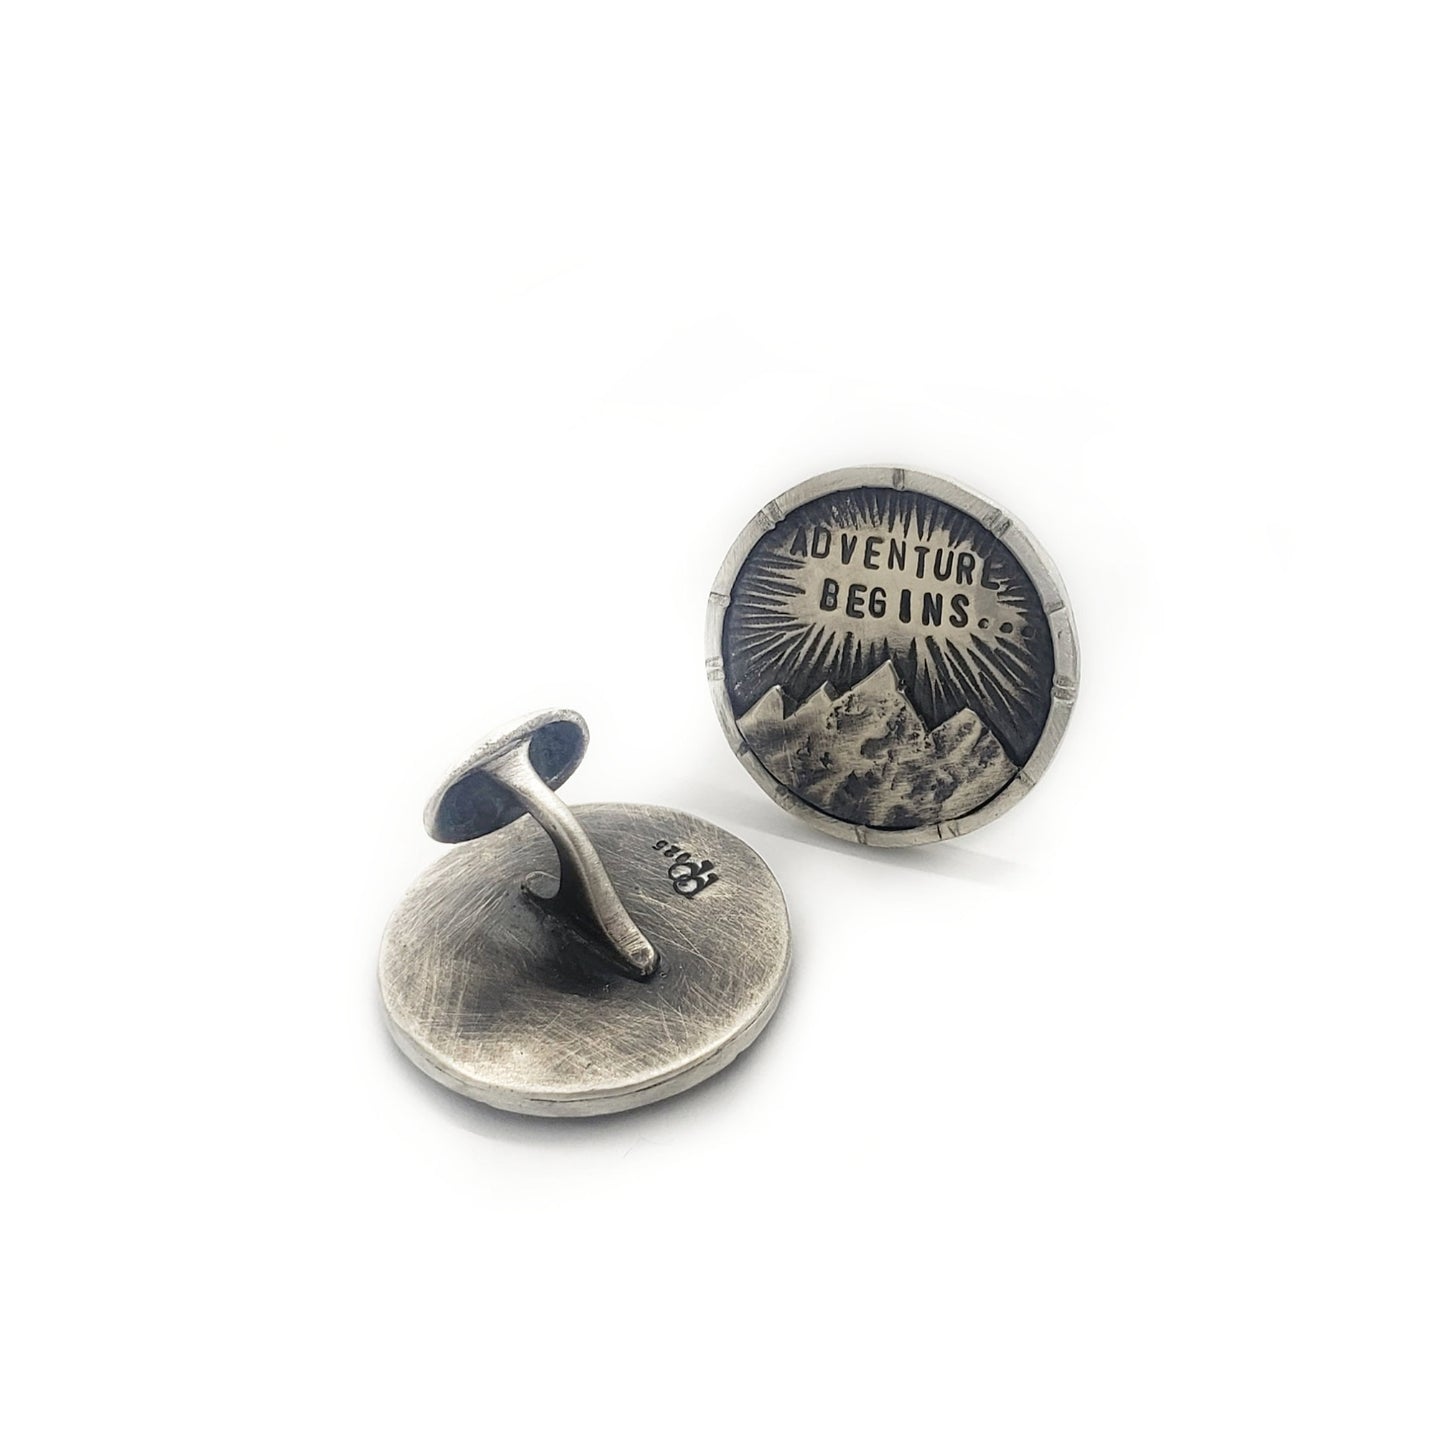 Our Adventure - Cuff Links